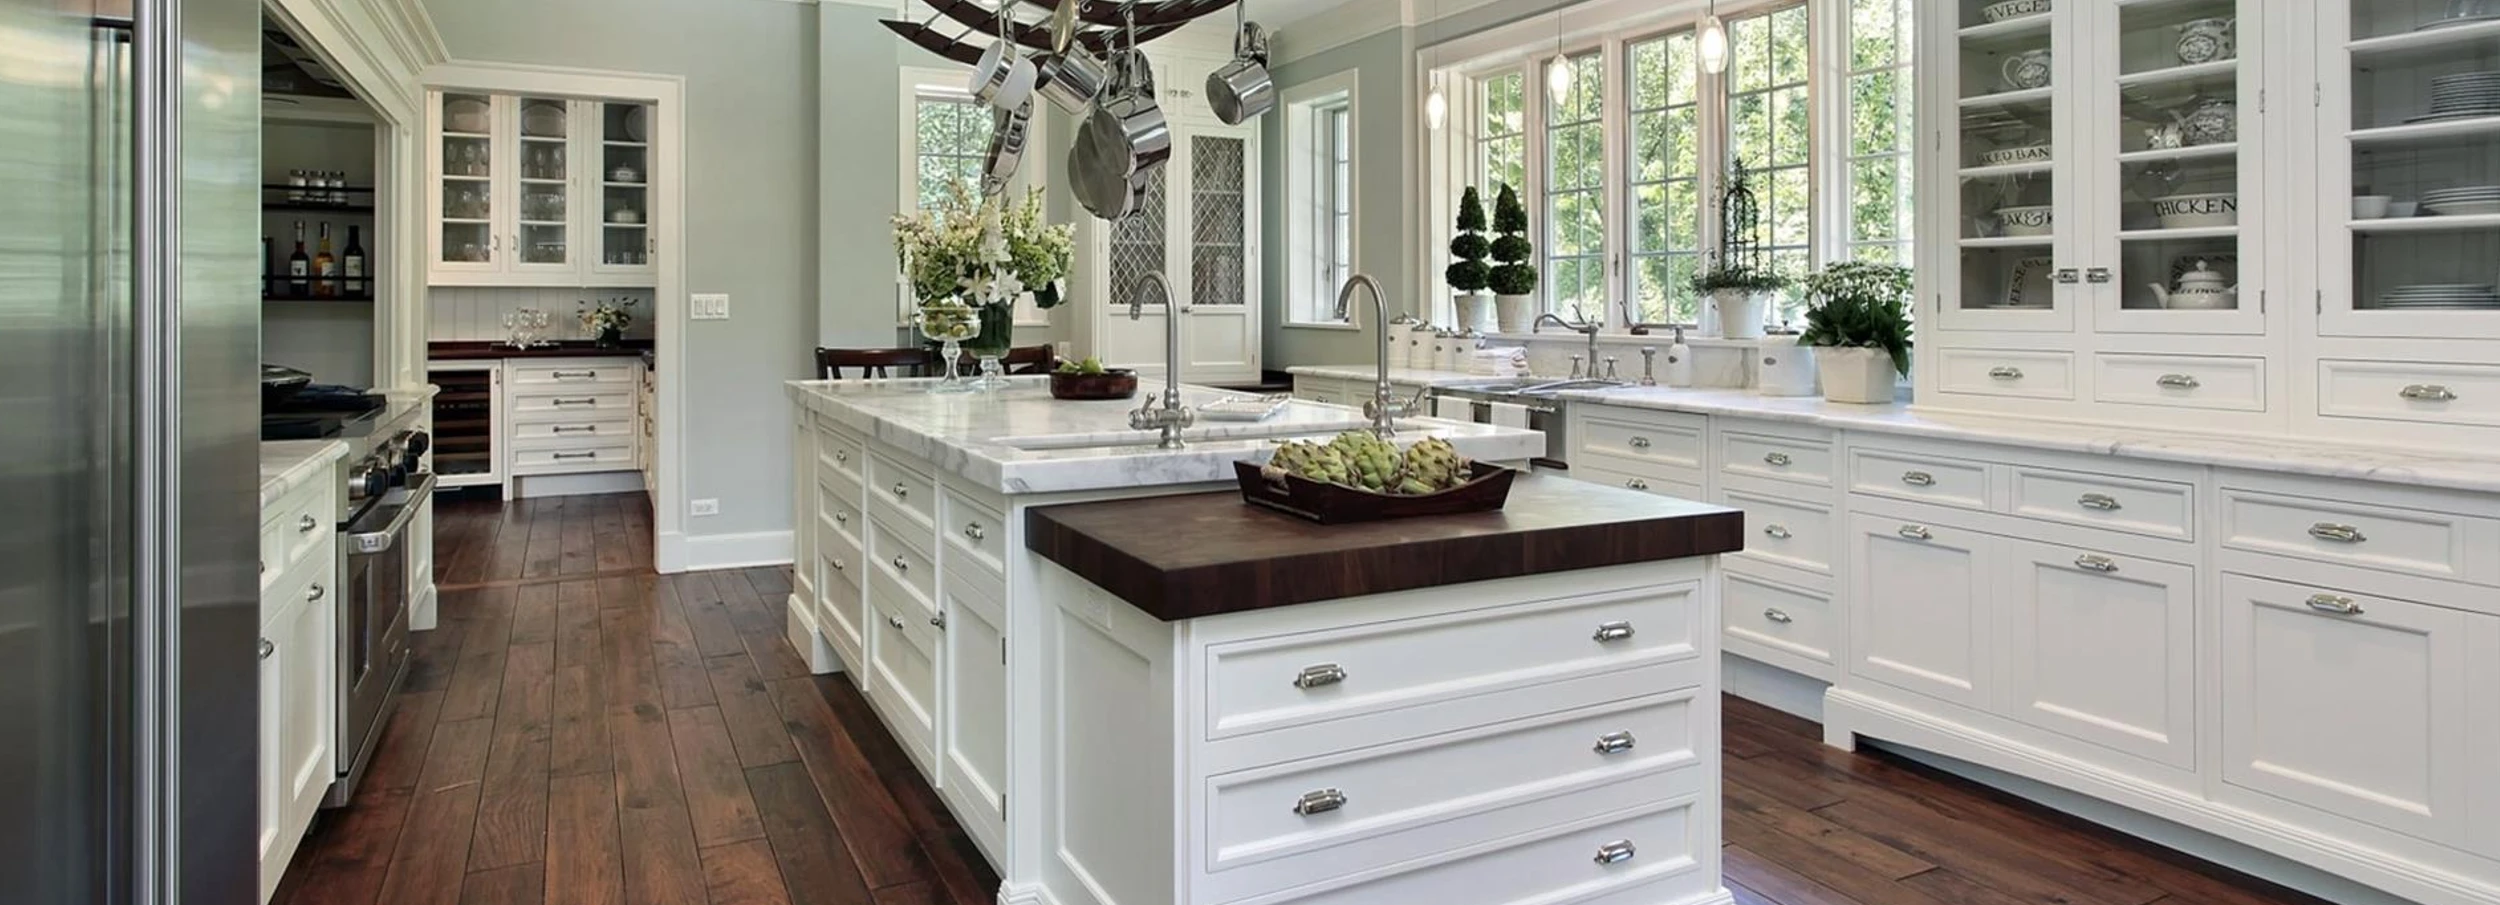 A kitchen with white cabinets, center island and black marble countertops.